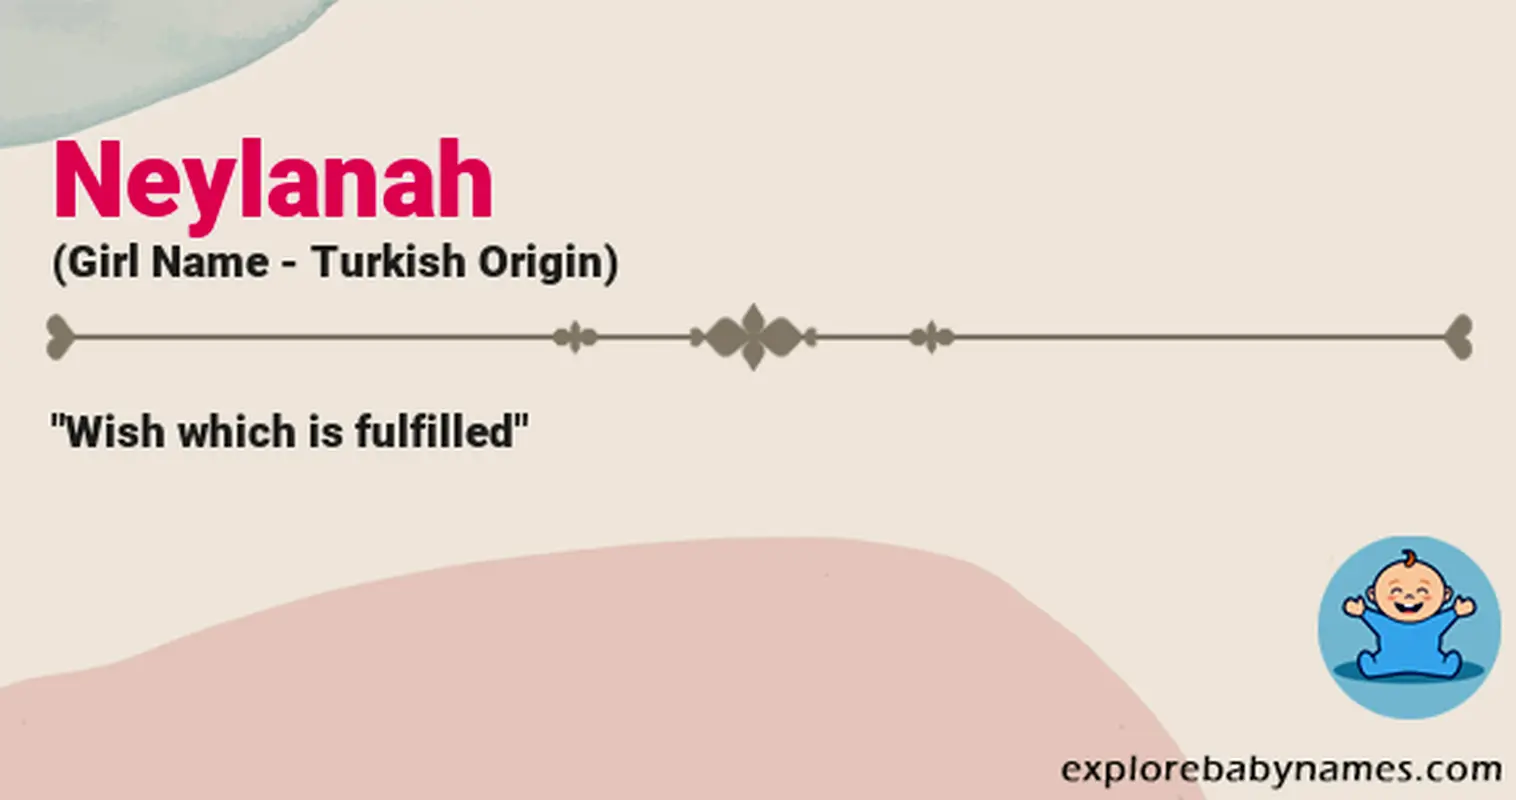 Meaning of Neylanah